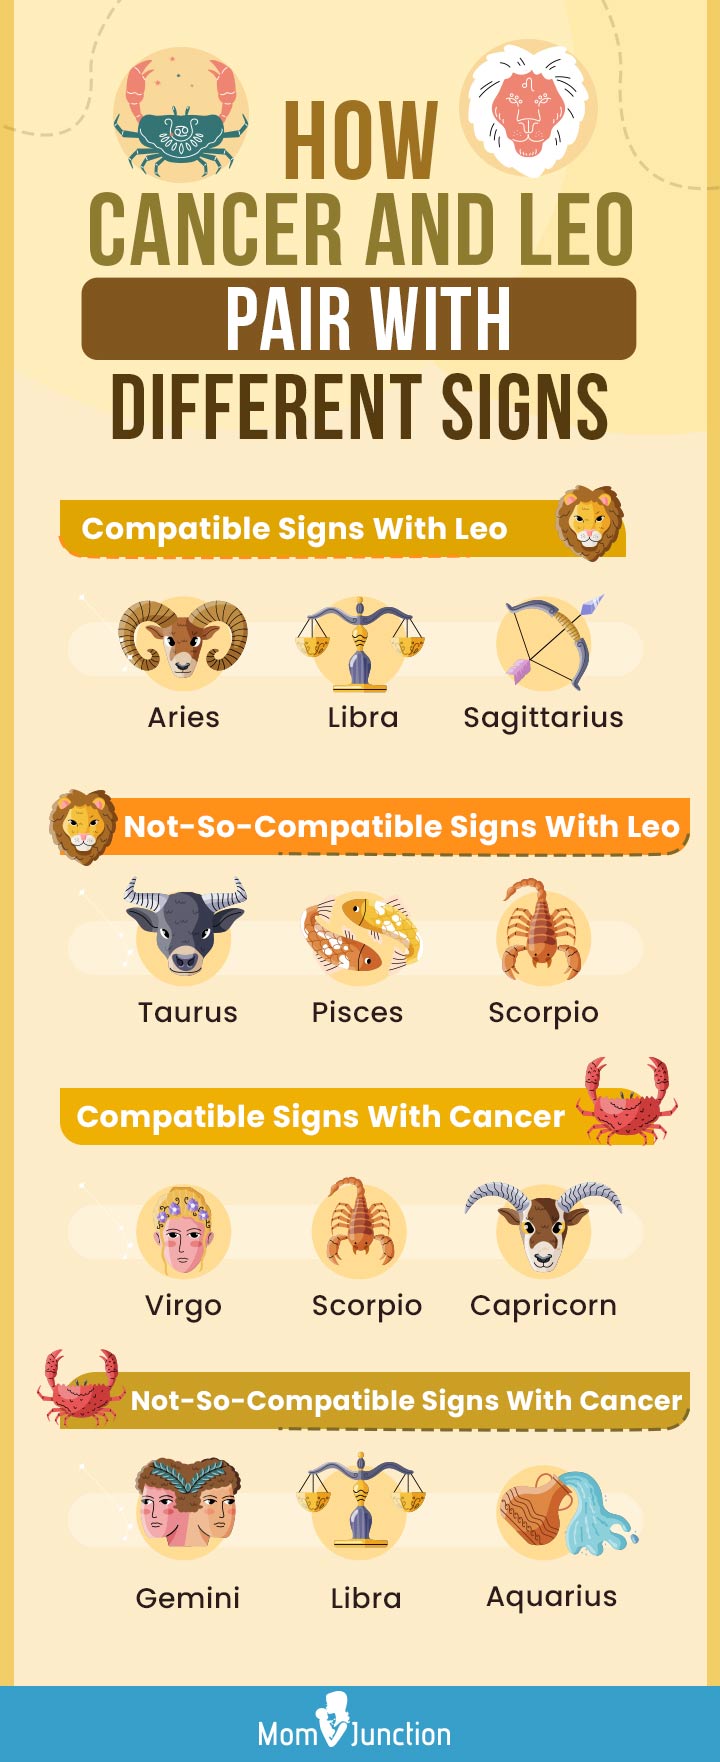 how cancer and leo pair with different signs (infographic)